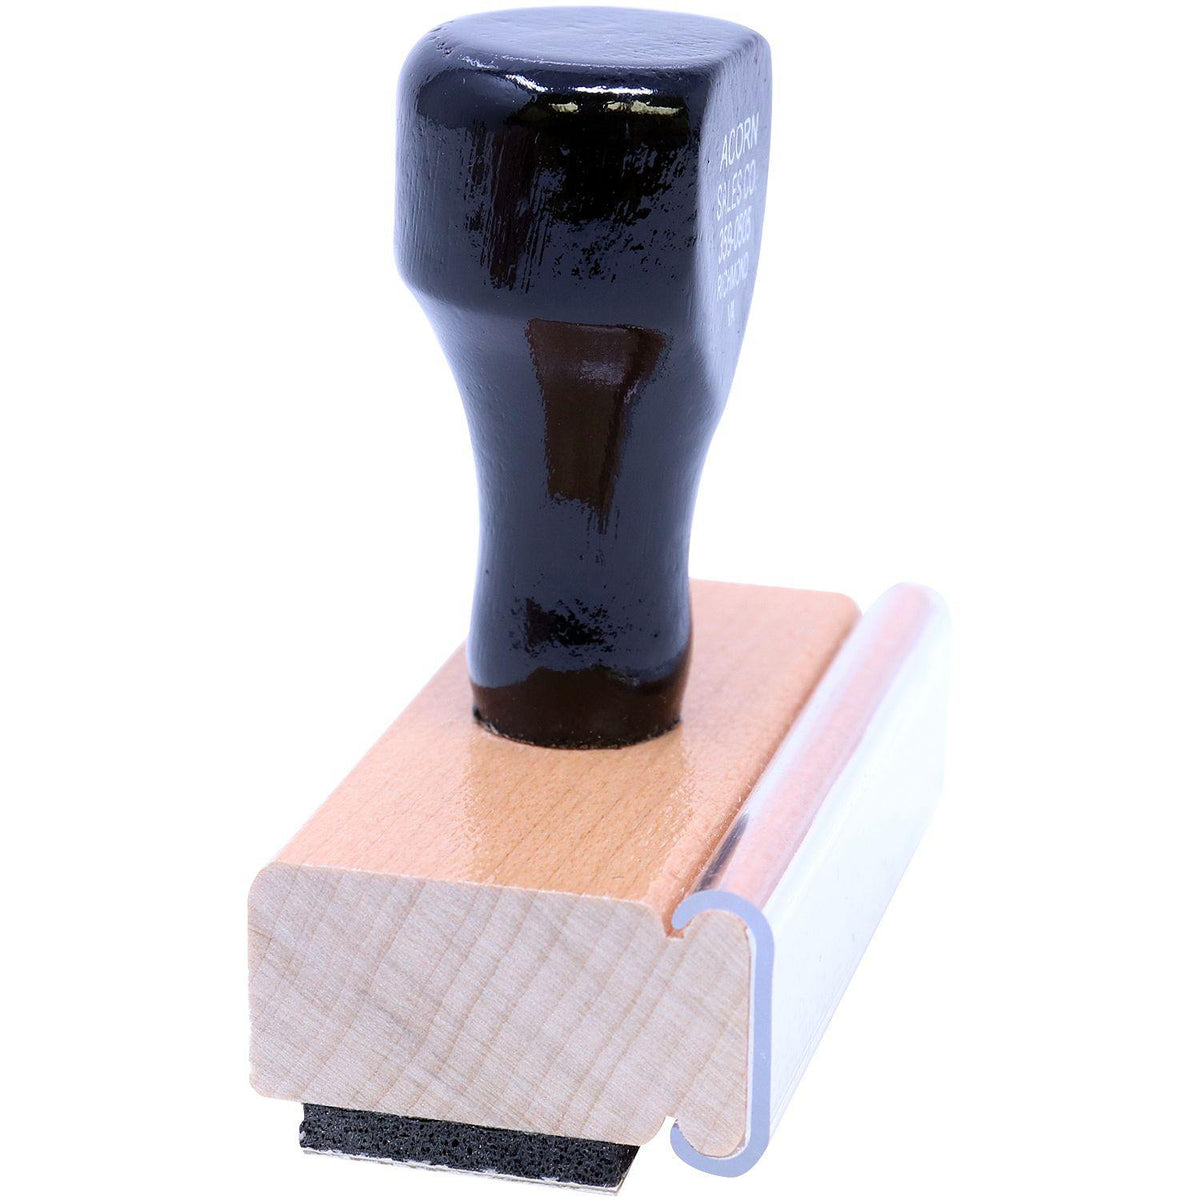 Side View of Large Perfect Rubber Stamp at an Angle